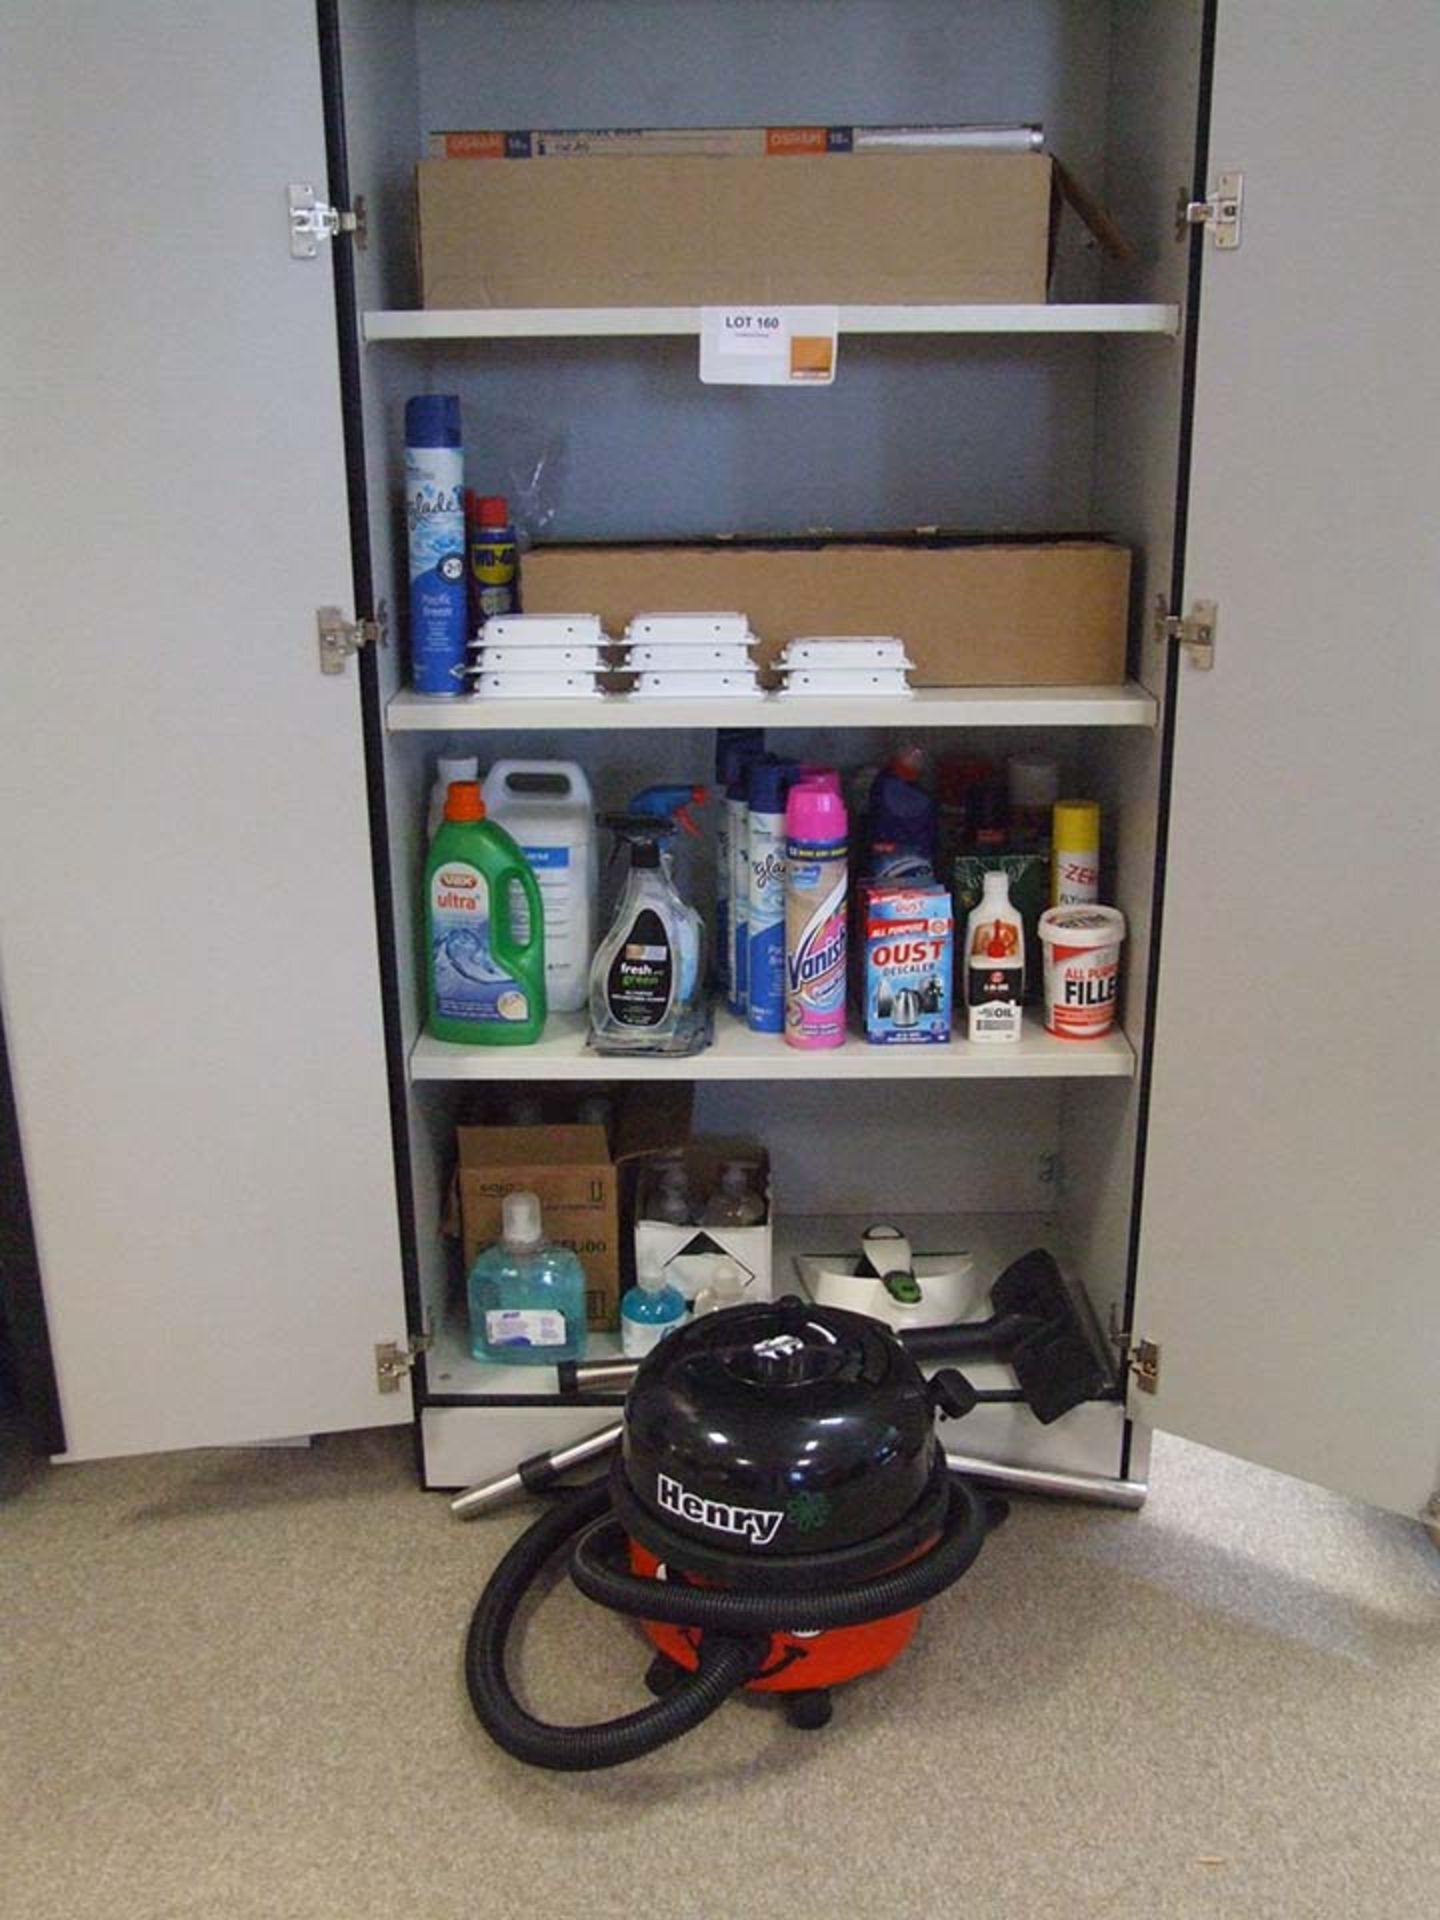 Contents of cupboard to include HENRY Vac light tubes and cleaning materials